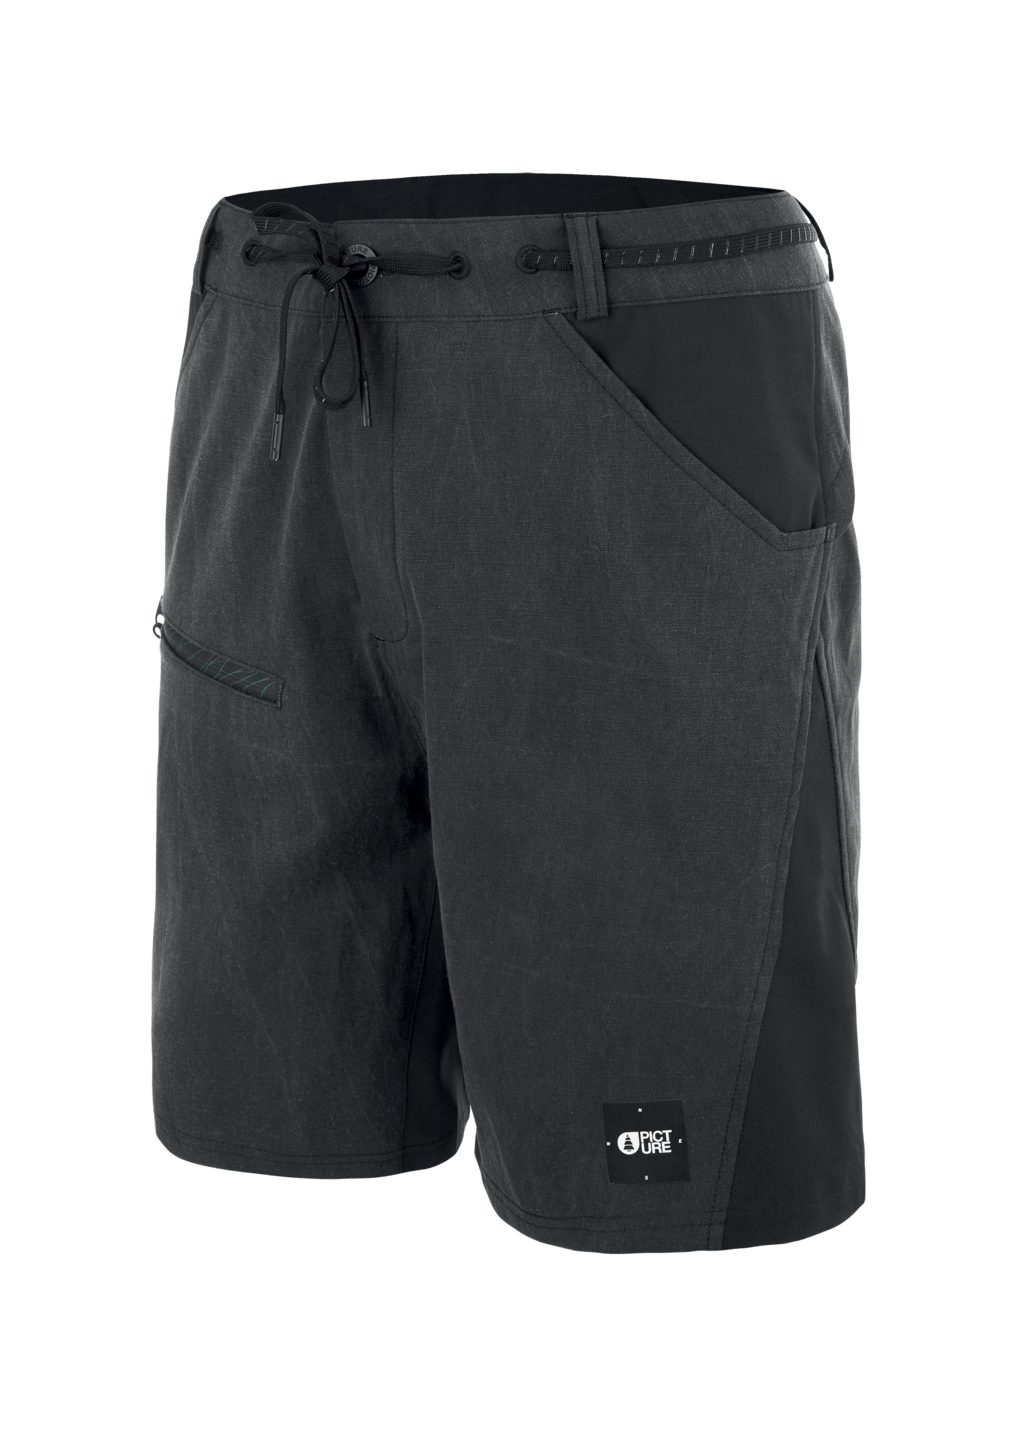 Picture Organic Men's Robust Short - Polyester, Black / 31